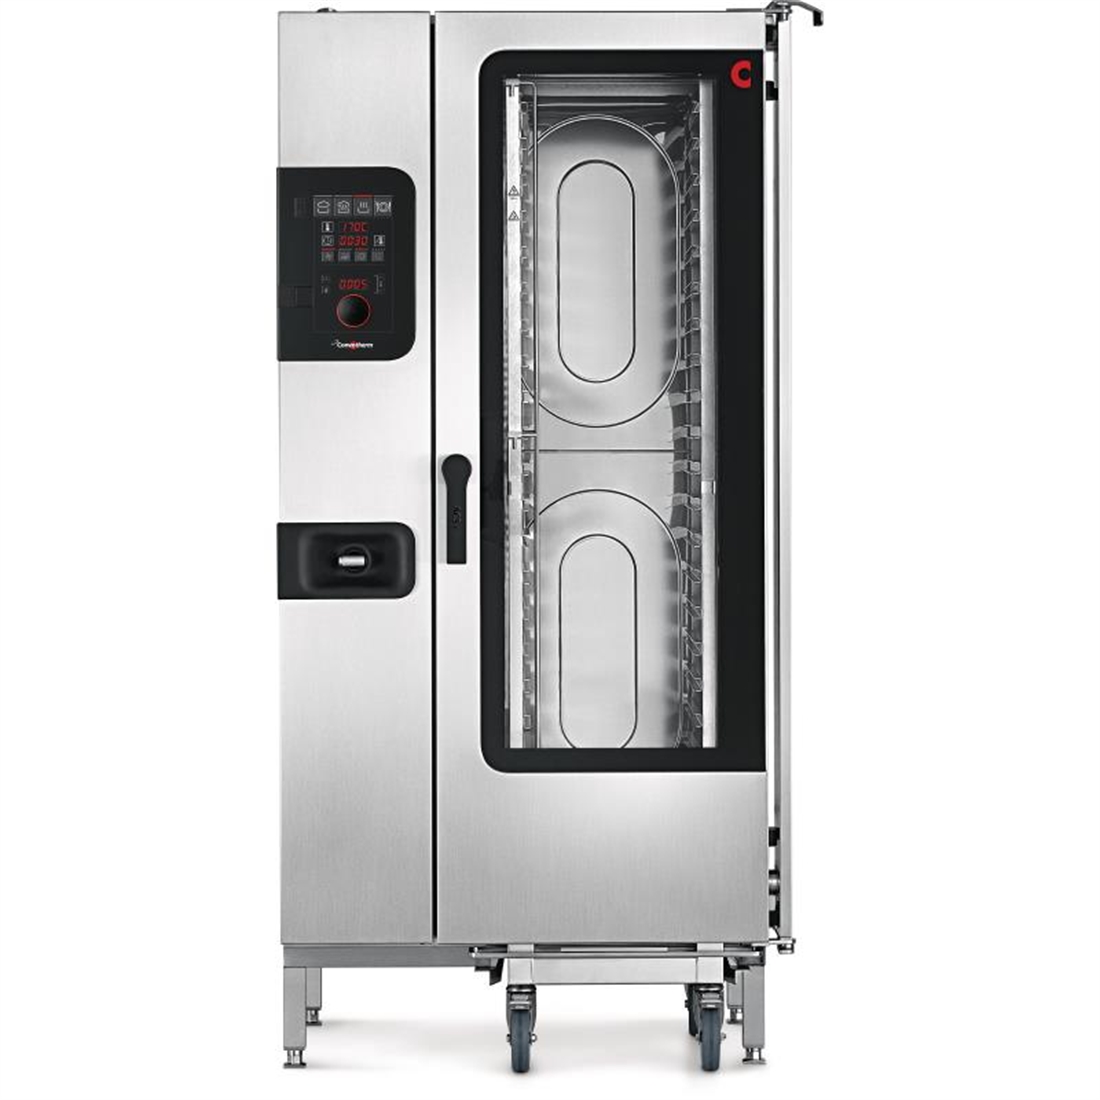 Convotherm 4 easyDial Combi Oven 20 x 1 x1 GN Grid with ConvoGrill and Install